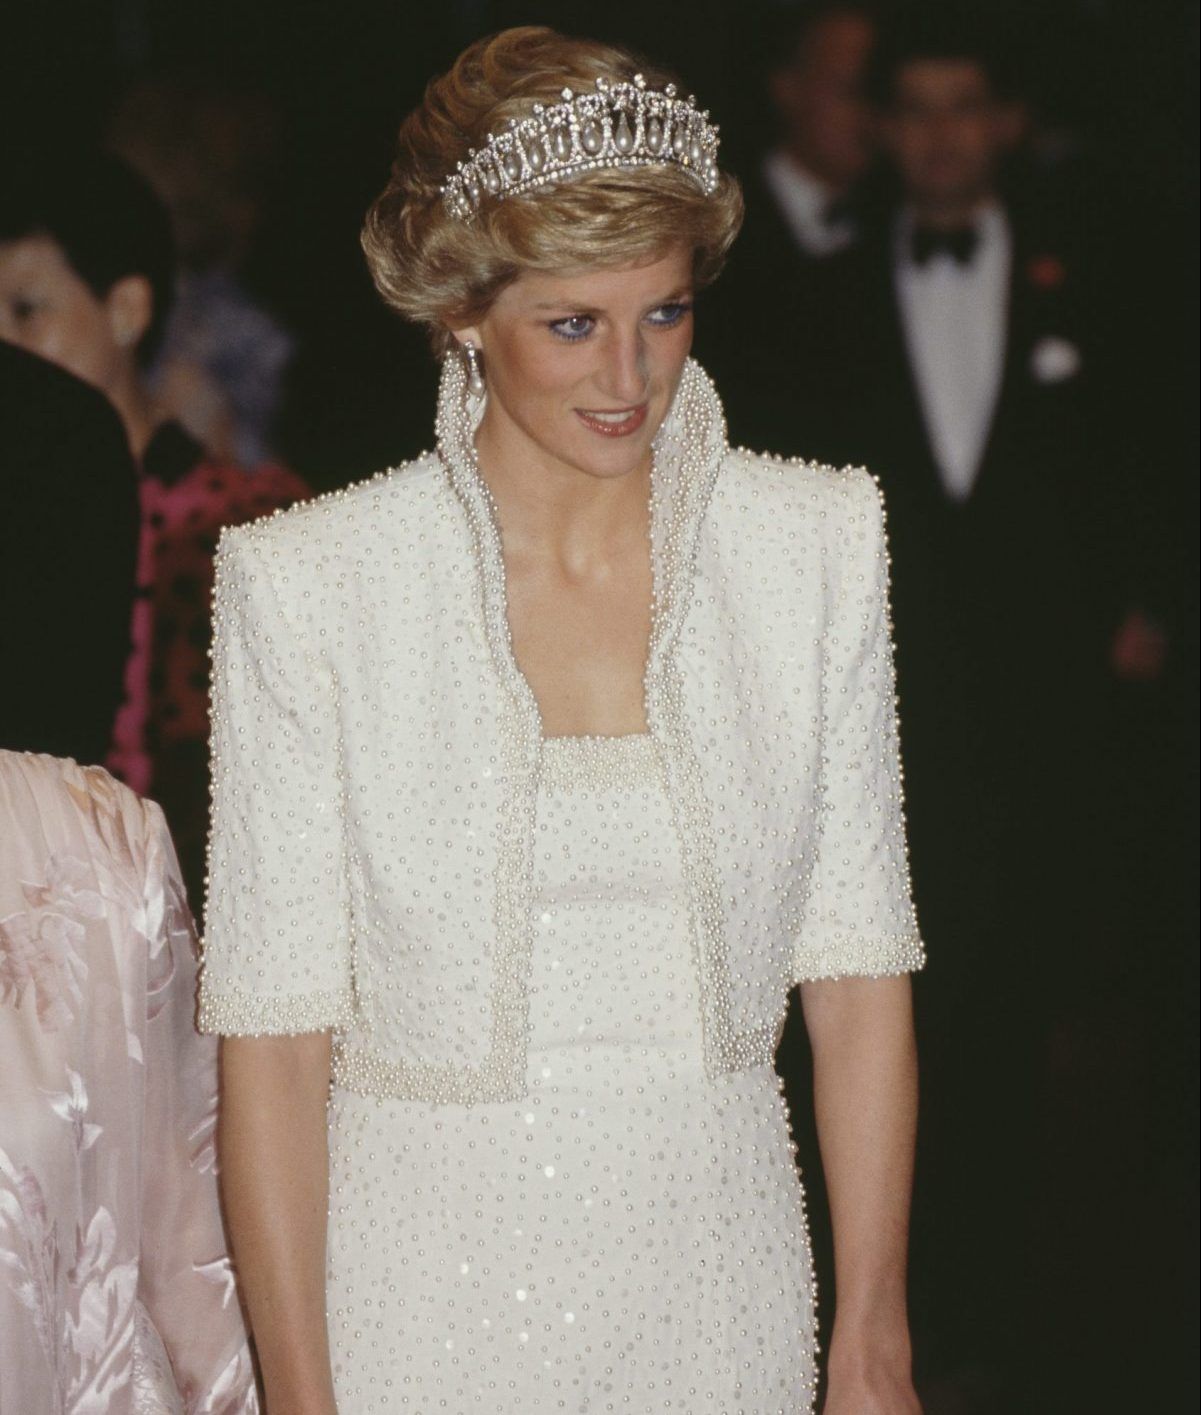 Diana, Princess of Wales (1961 - 1997) attends the gala opening of a cultural centre in Hong Kong, November 1989. She is wearing a white beaded evening gown by Catherine Walker and the Queen Mary tiara. 